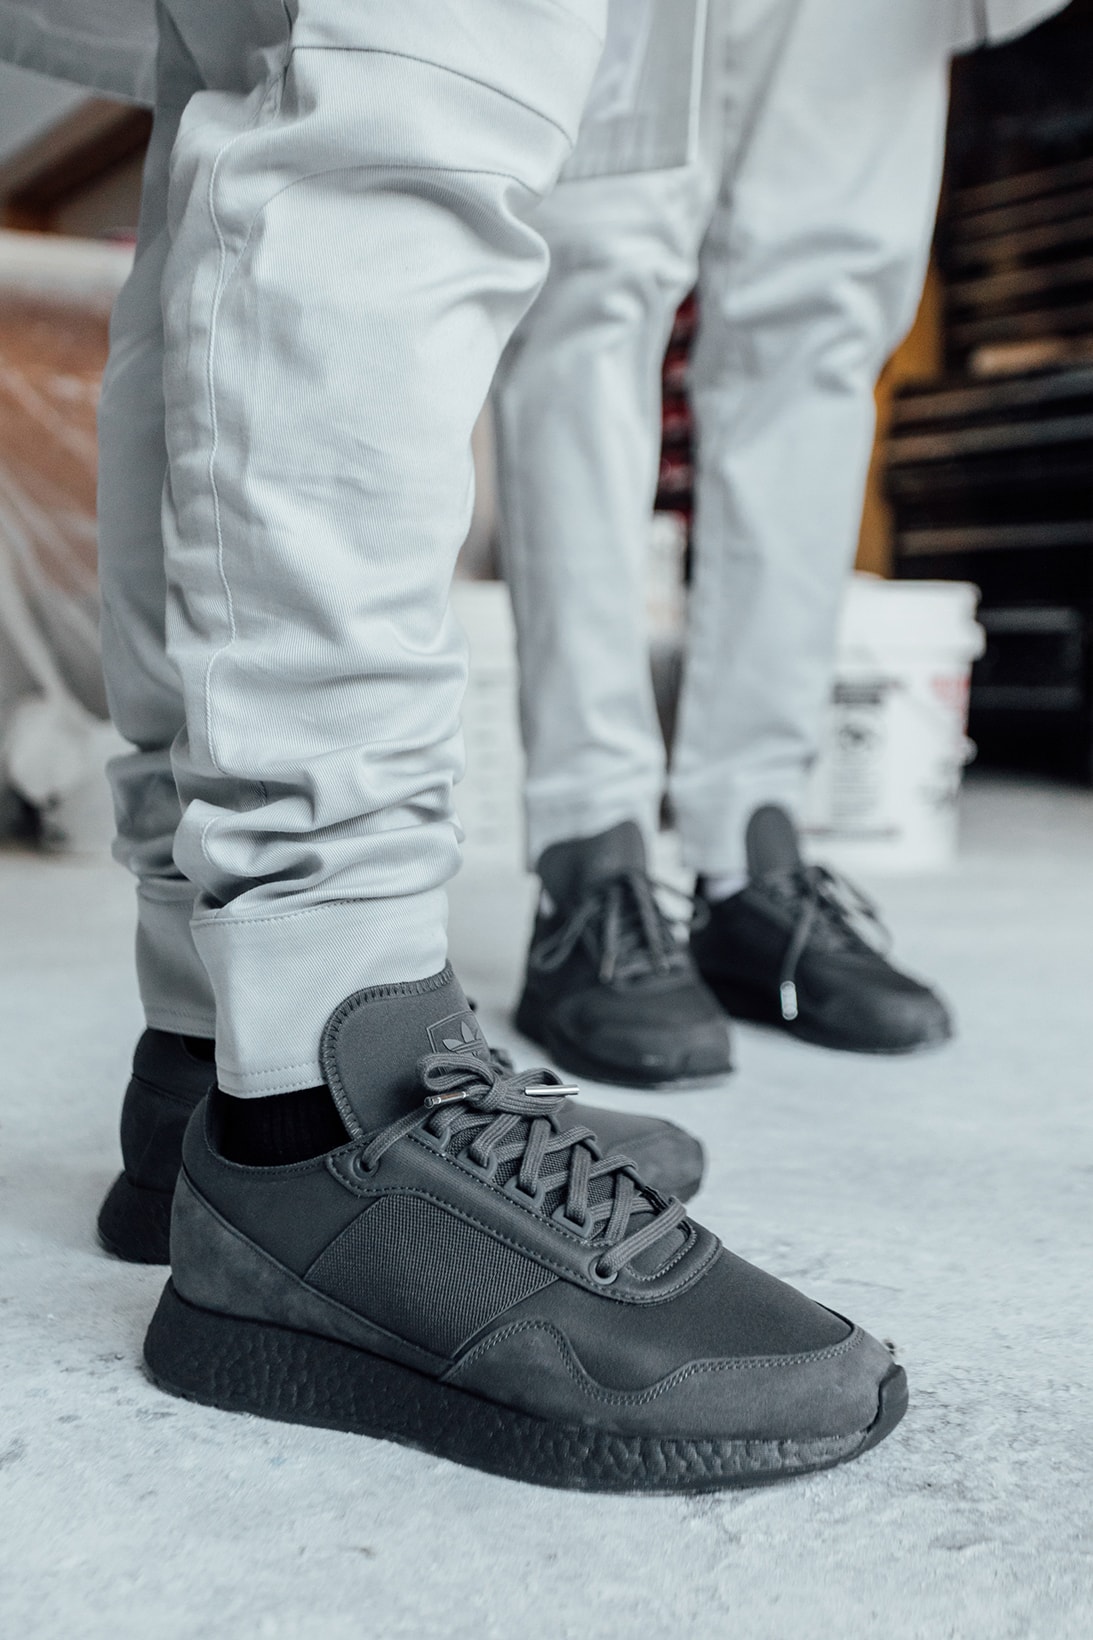 KITH Daniel Arsham Studio Standard Issue Collection Collaboration adidas Originals New York 2017 December 8 Release Date info Sneakers Shoes Footwear